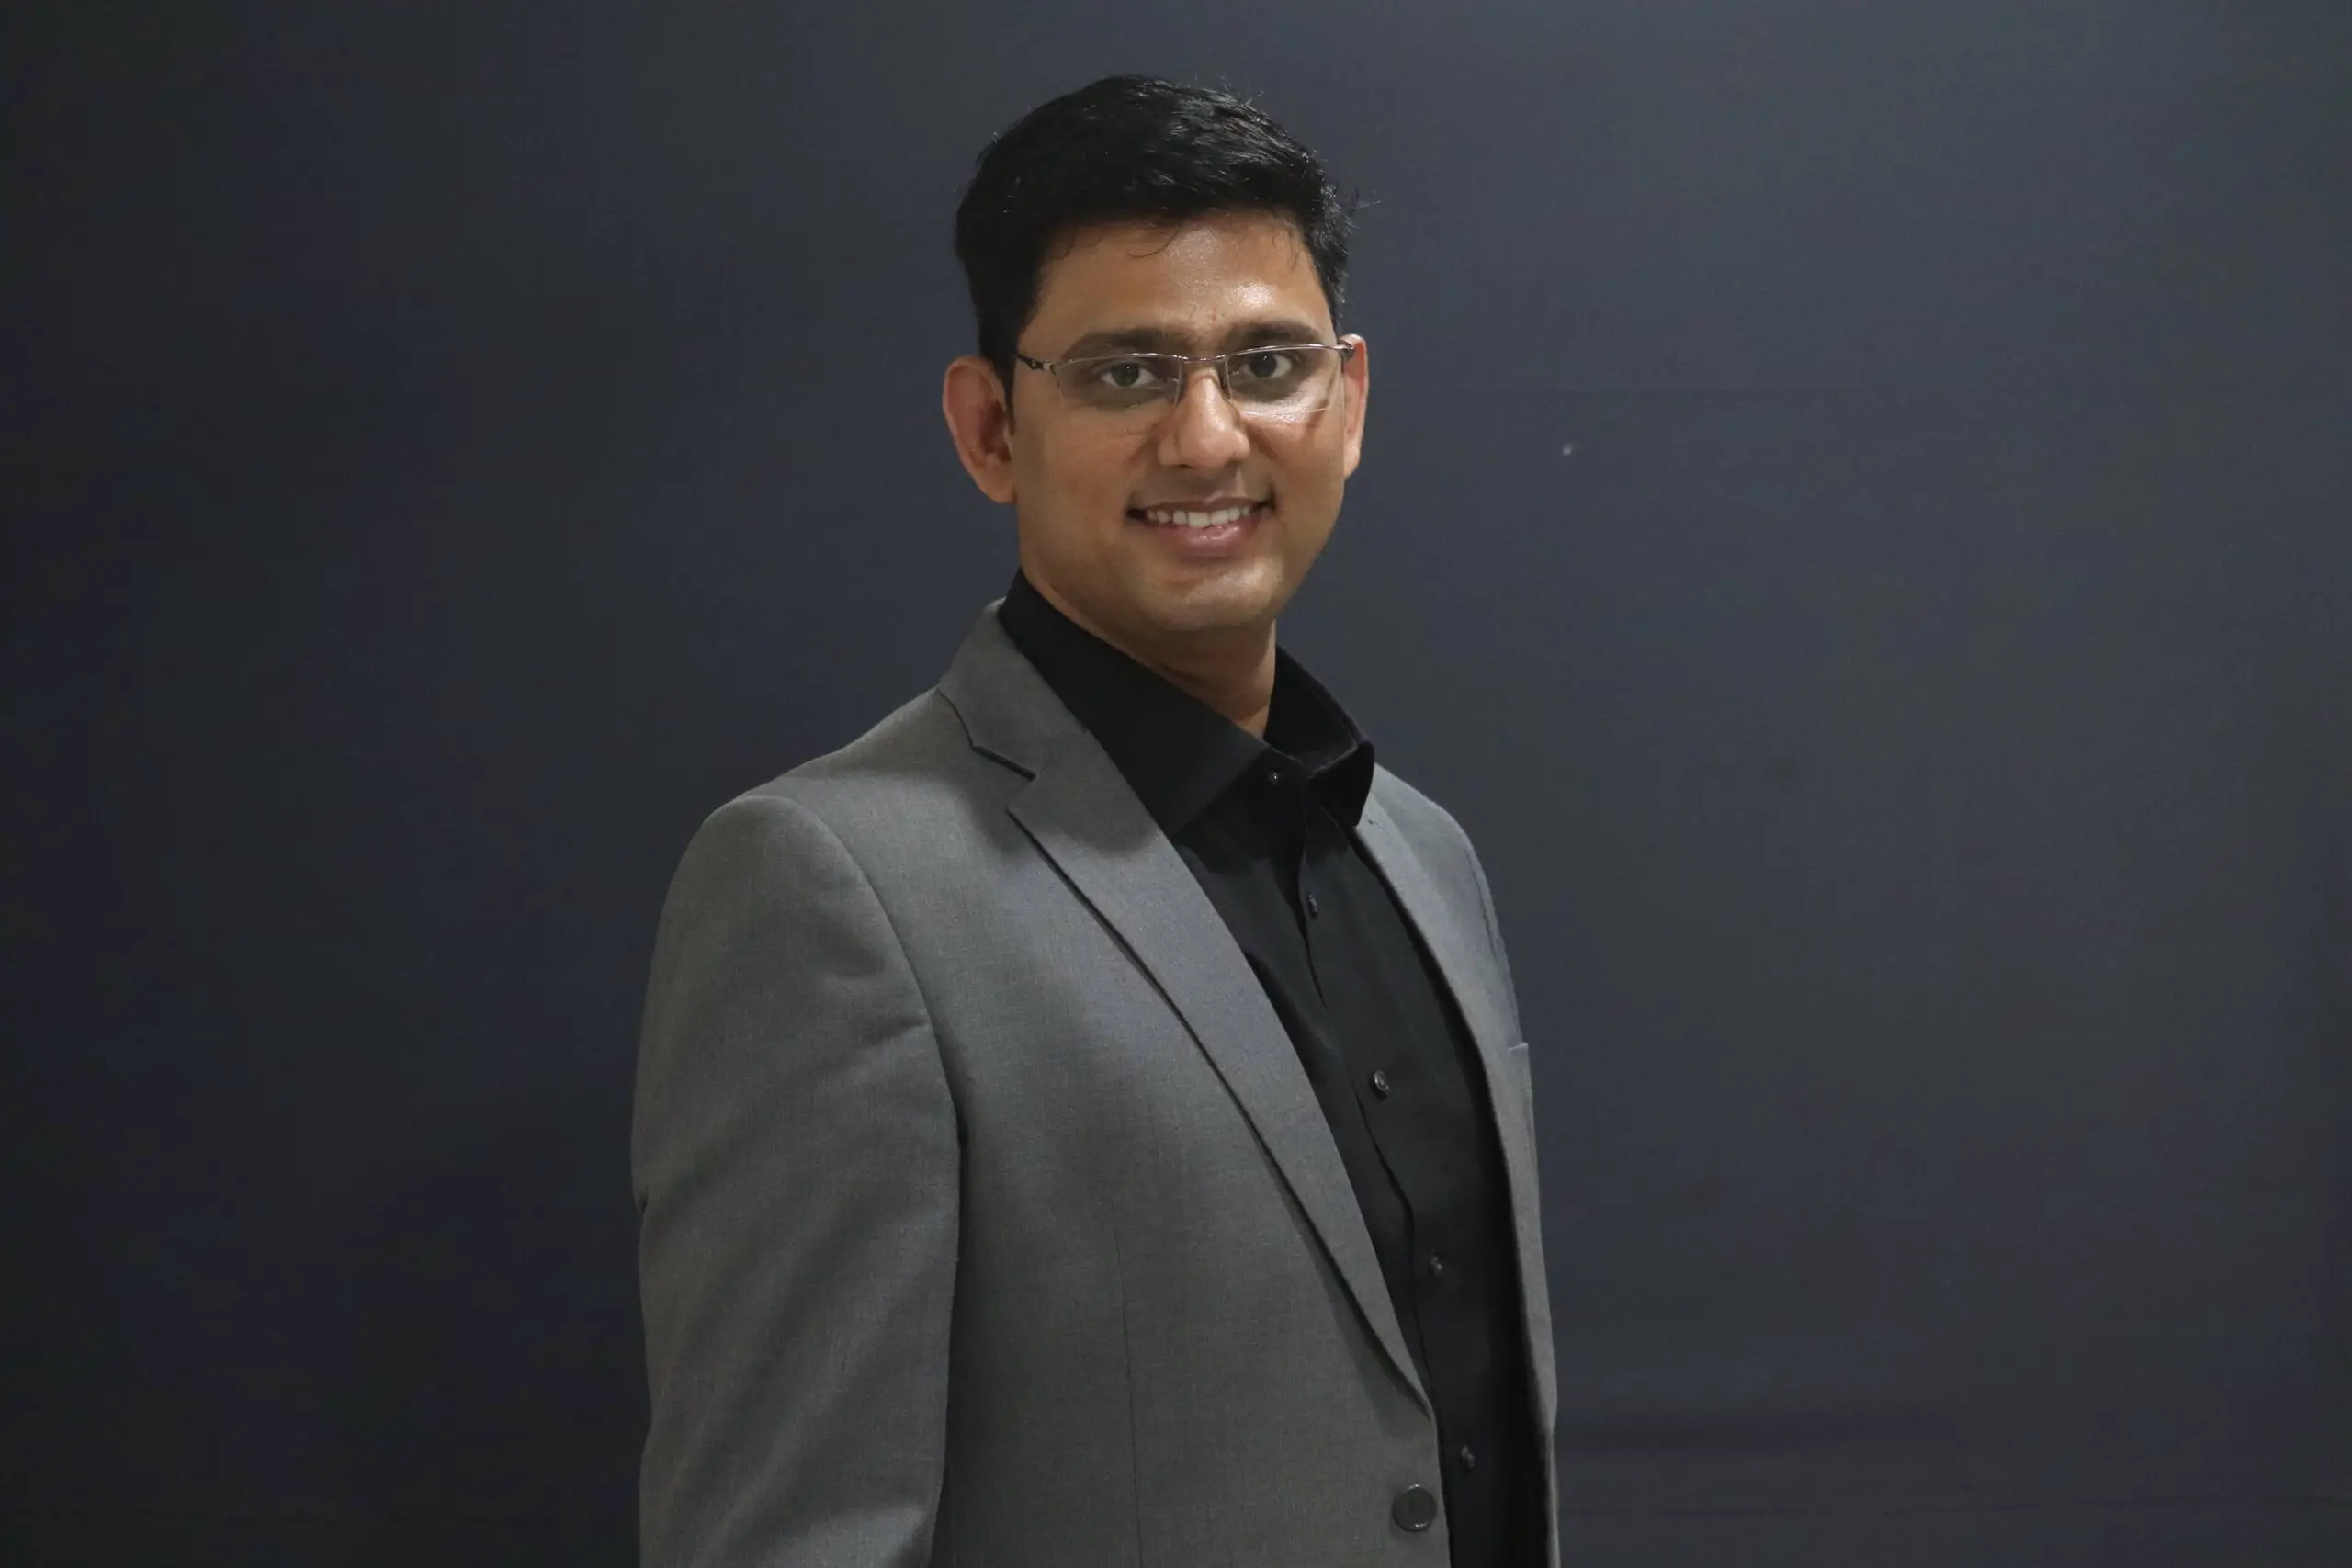 Big Data for effective Decision Making – A Talk with Ashwani Rawat, Co-Founder & Director, Transerve Technologies